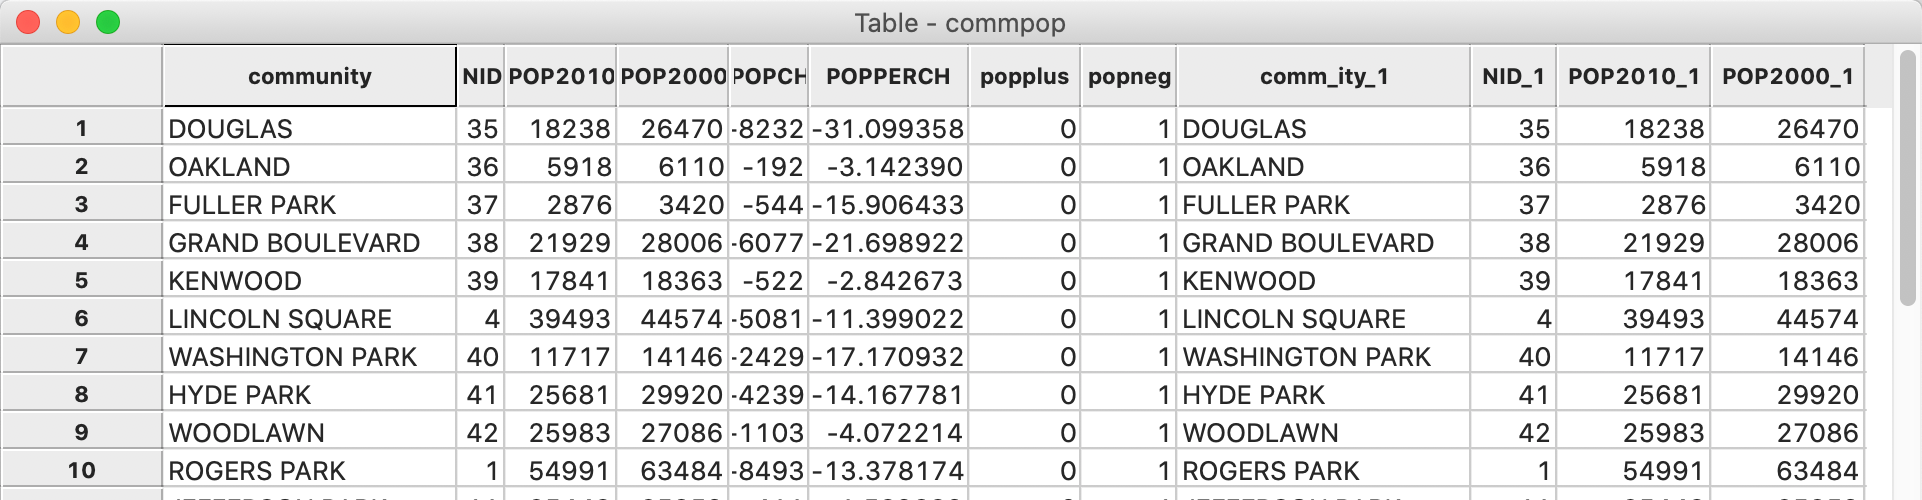 Merged tables